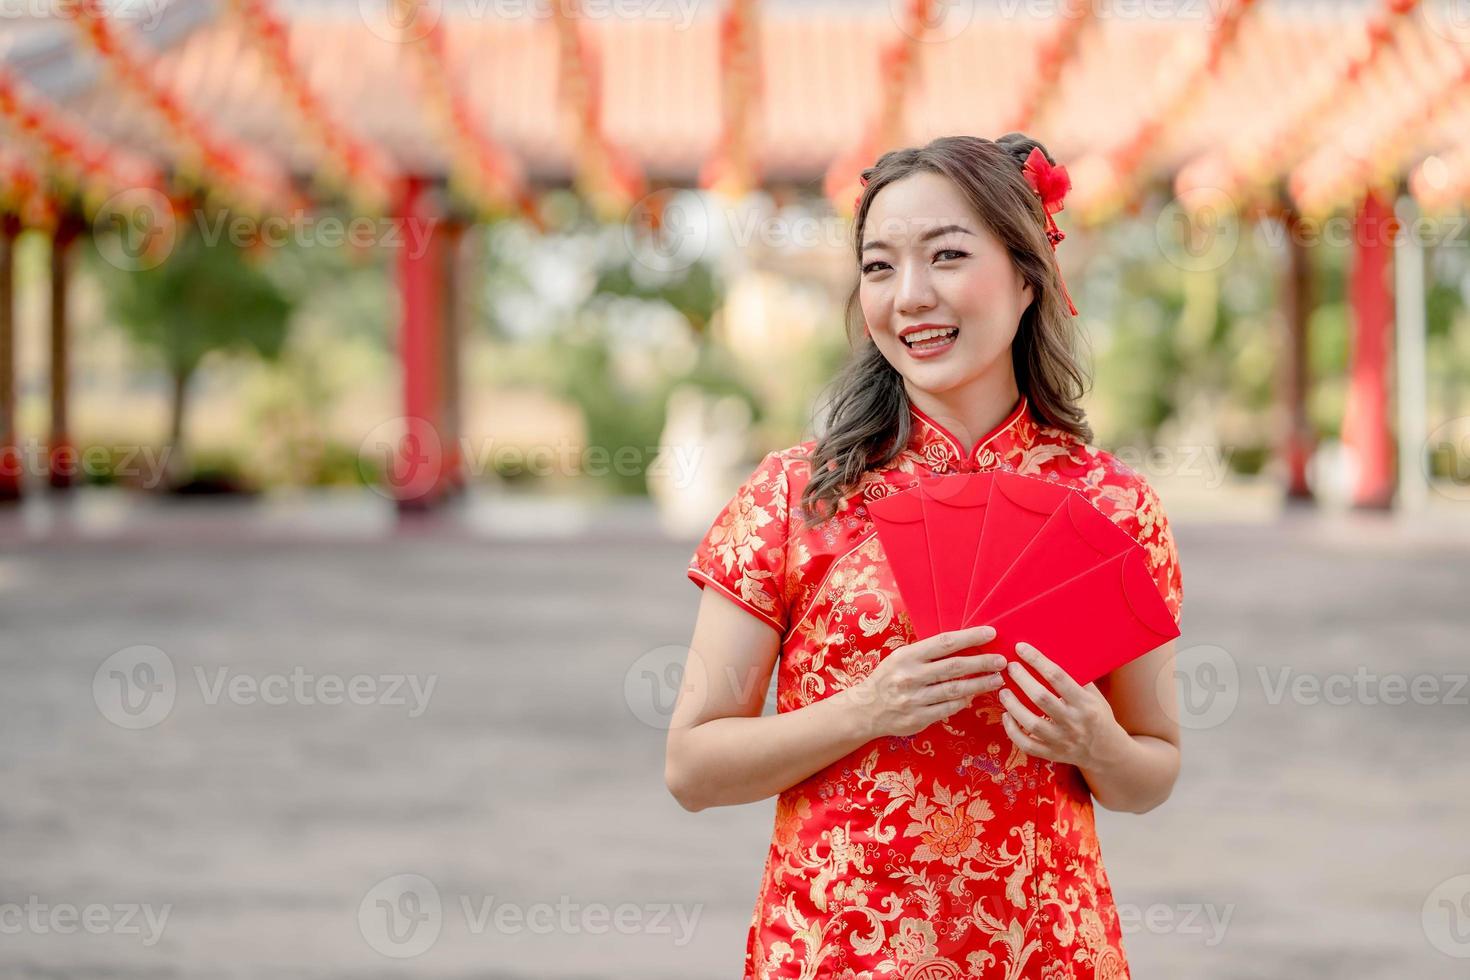 Young asian woman smiling happily holding ang pao, red envelopes wearing cheongsam looking confident in Chinese Buddhist temple. Celebrate Chinese lunar new year, festive season holiday photo